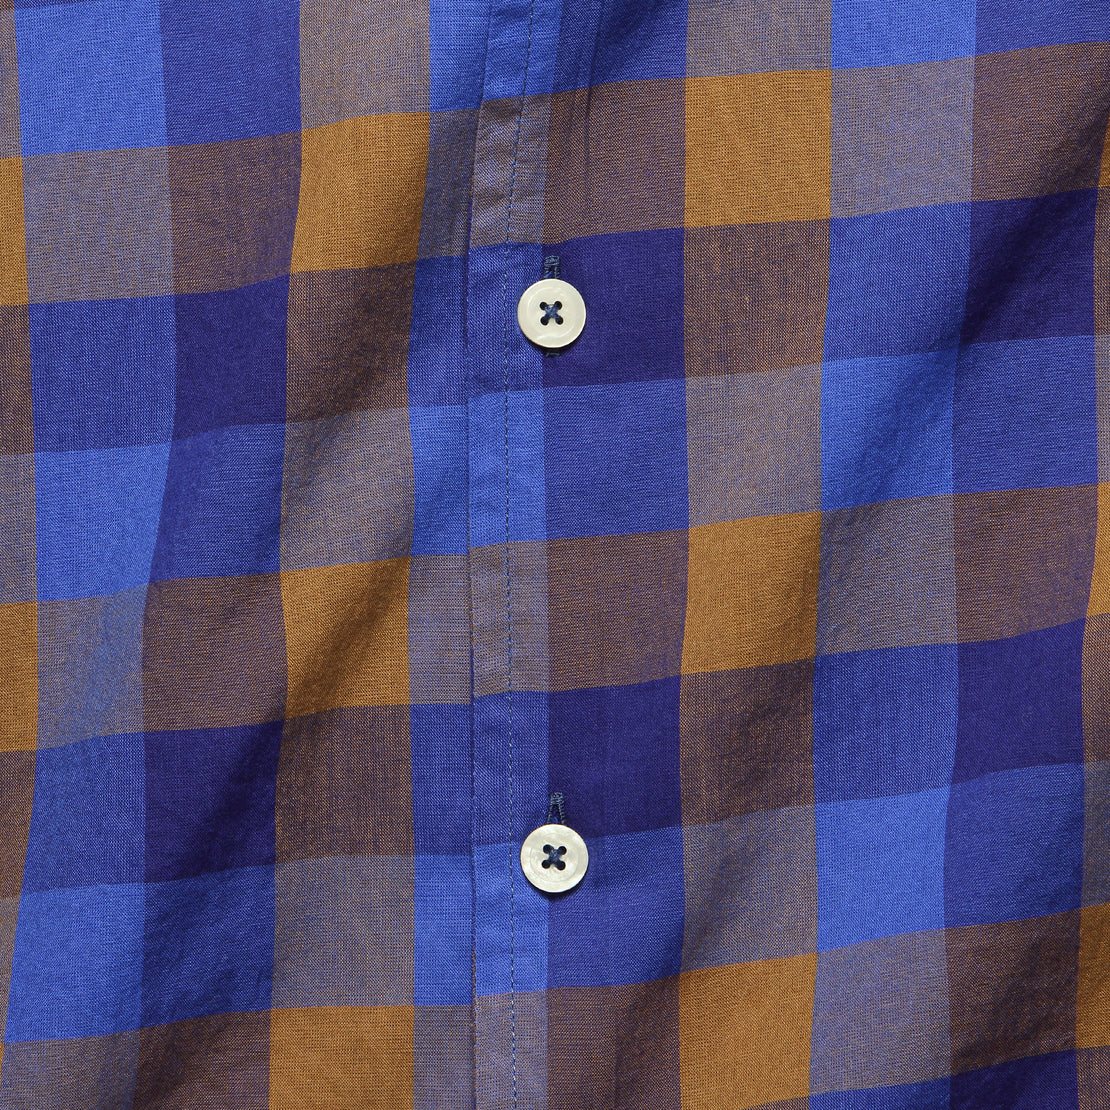 Chestnut Plaid Camp Shirt - Blue - Todd Snyder - STAG Provisions - Tops - L/S Woven - Plaid